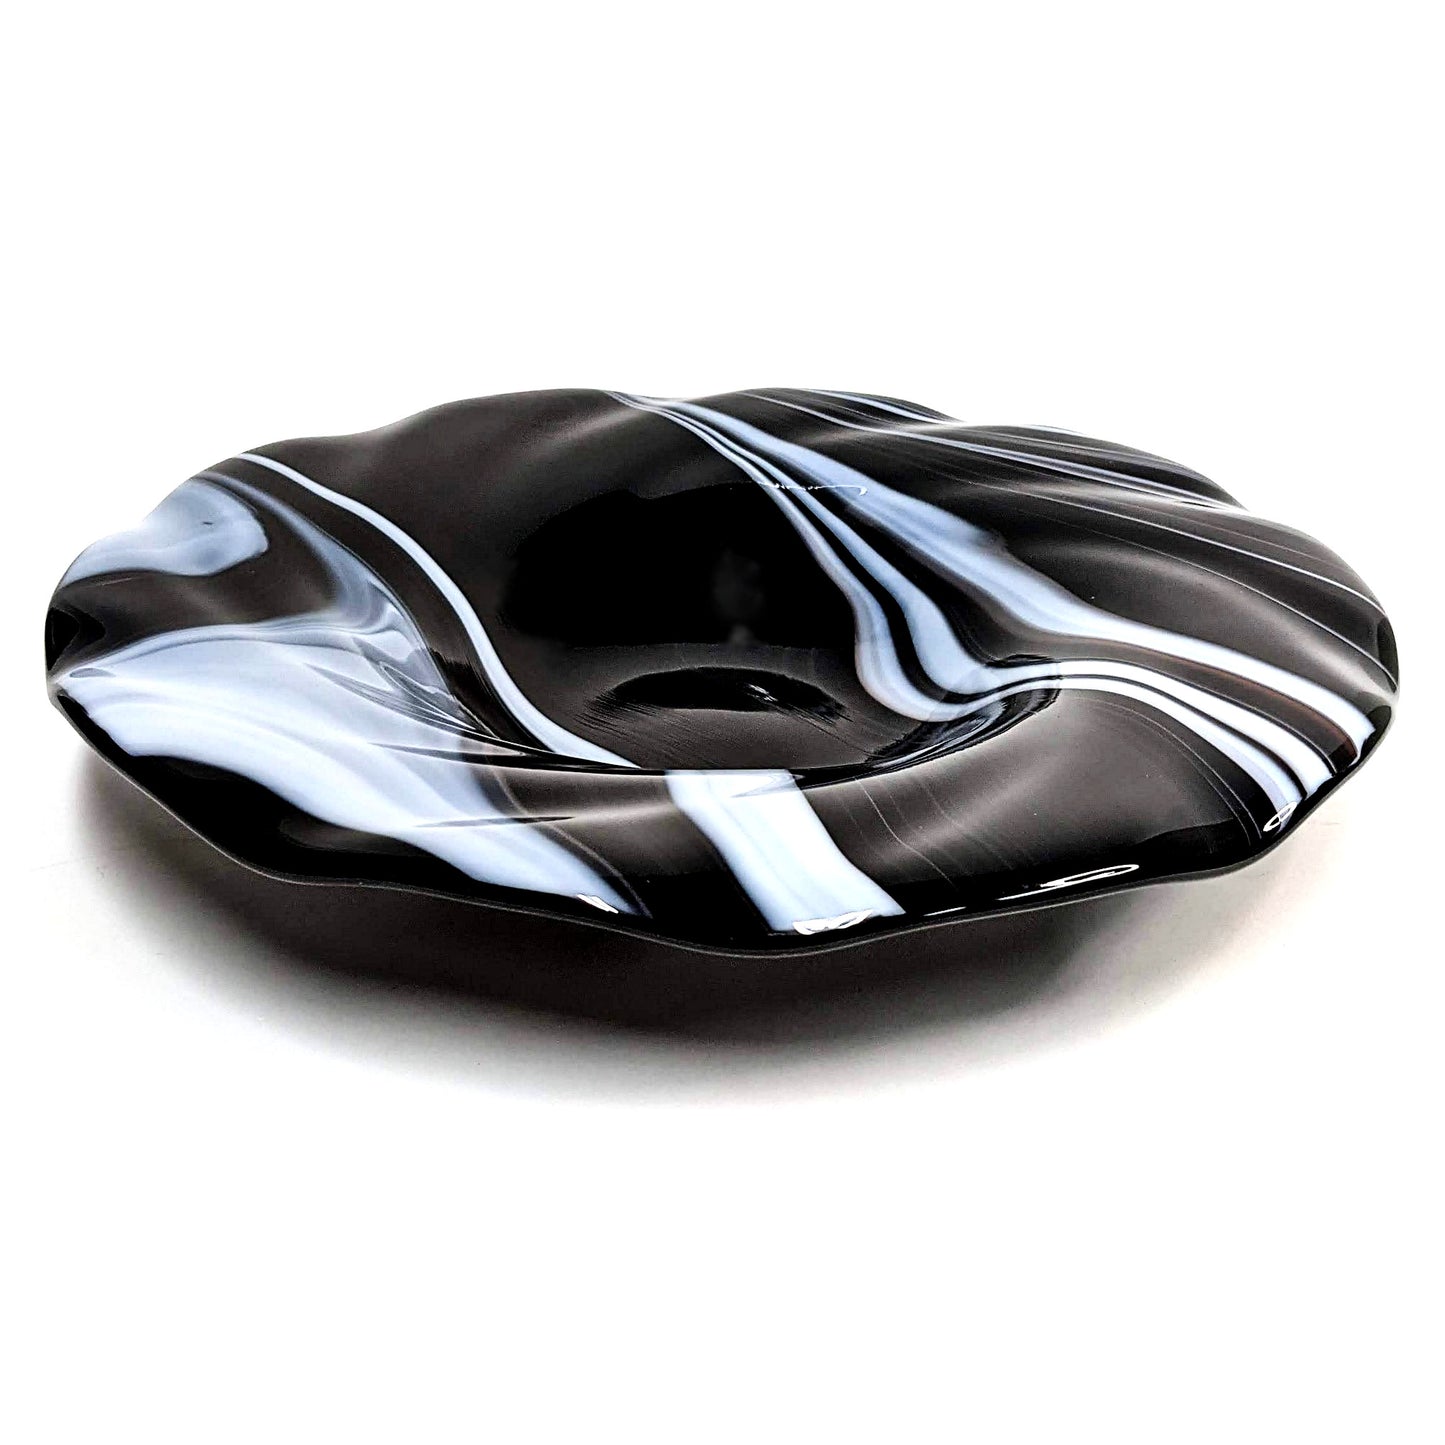 Contemporary Glass Art Bowl in Black and White